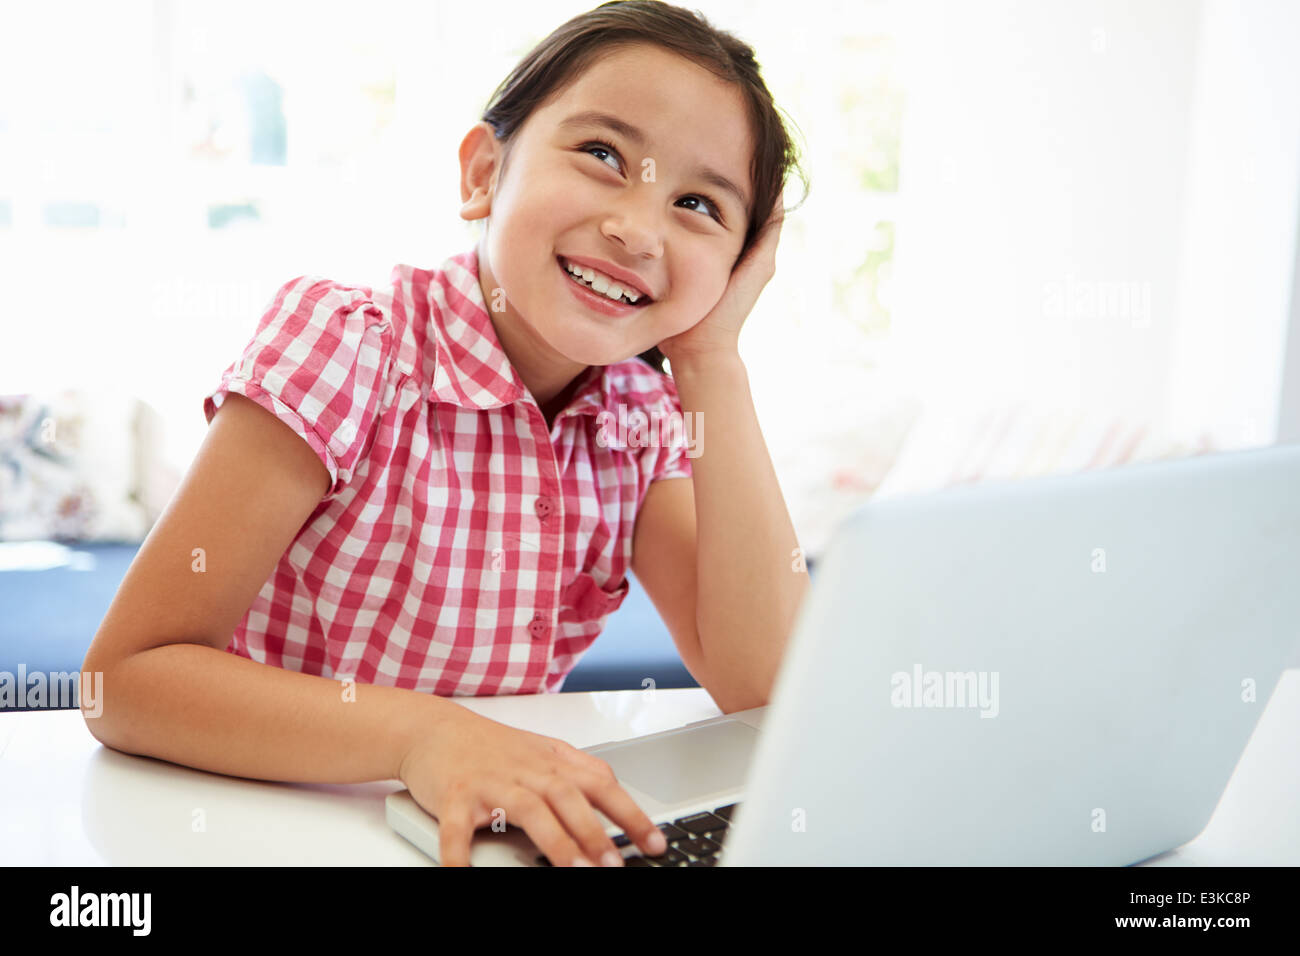 Asian Child Using Laptop At Home Stock Photo